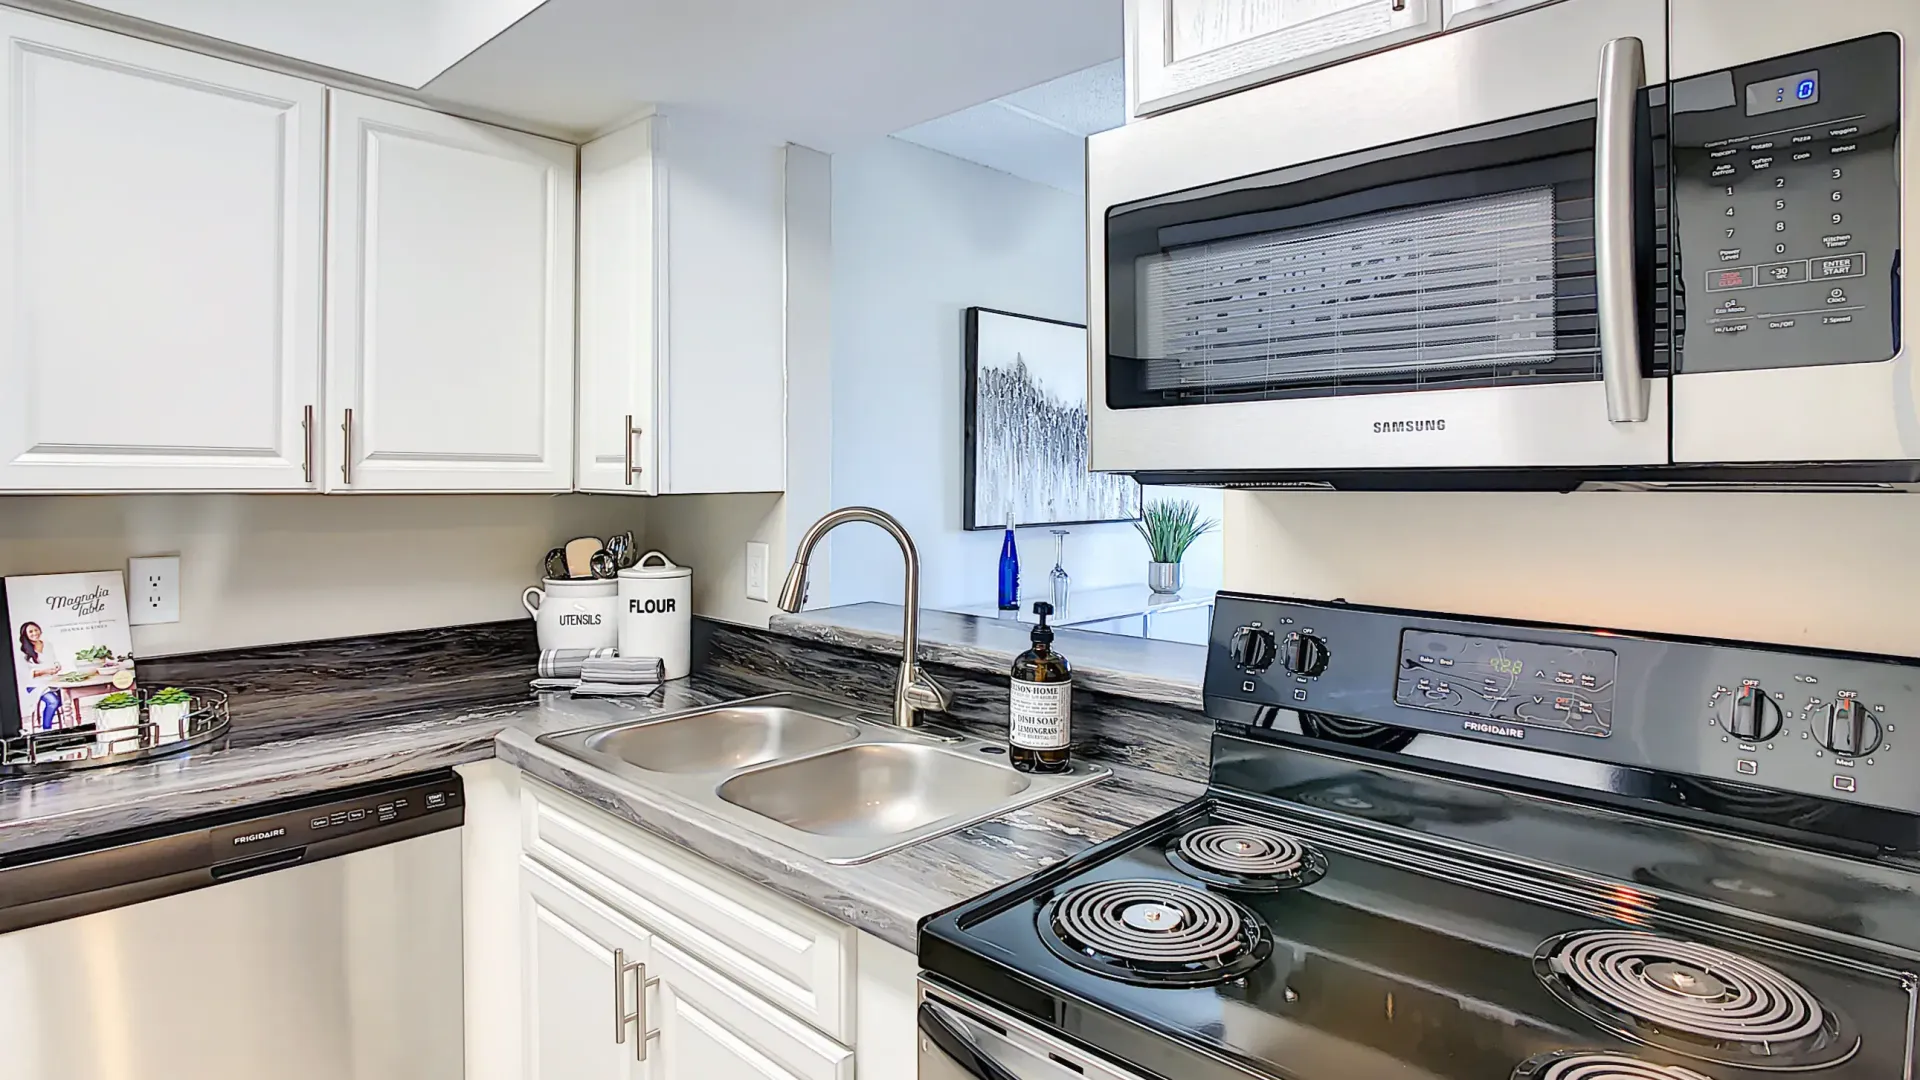 A well-appointed kitchen boasting ample upper and lower cabinets for optimized storage, highlighted by stainless steel appliances, including a microwave above the stove.